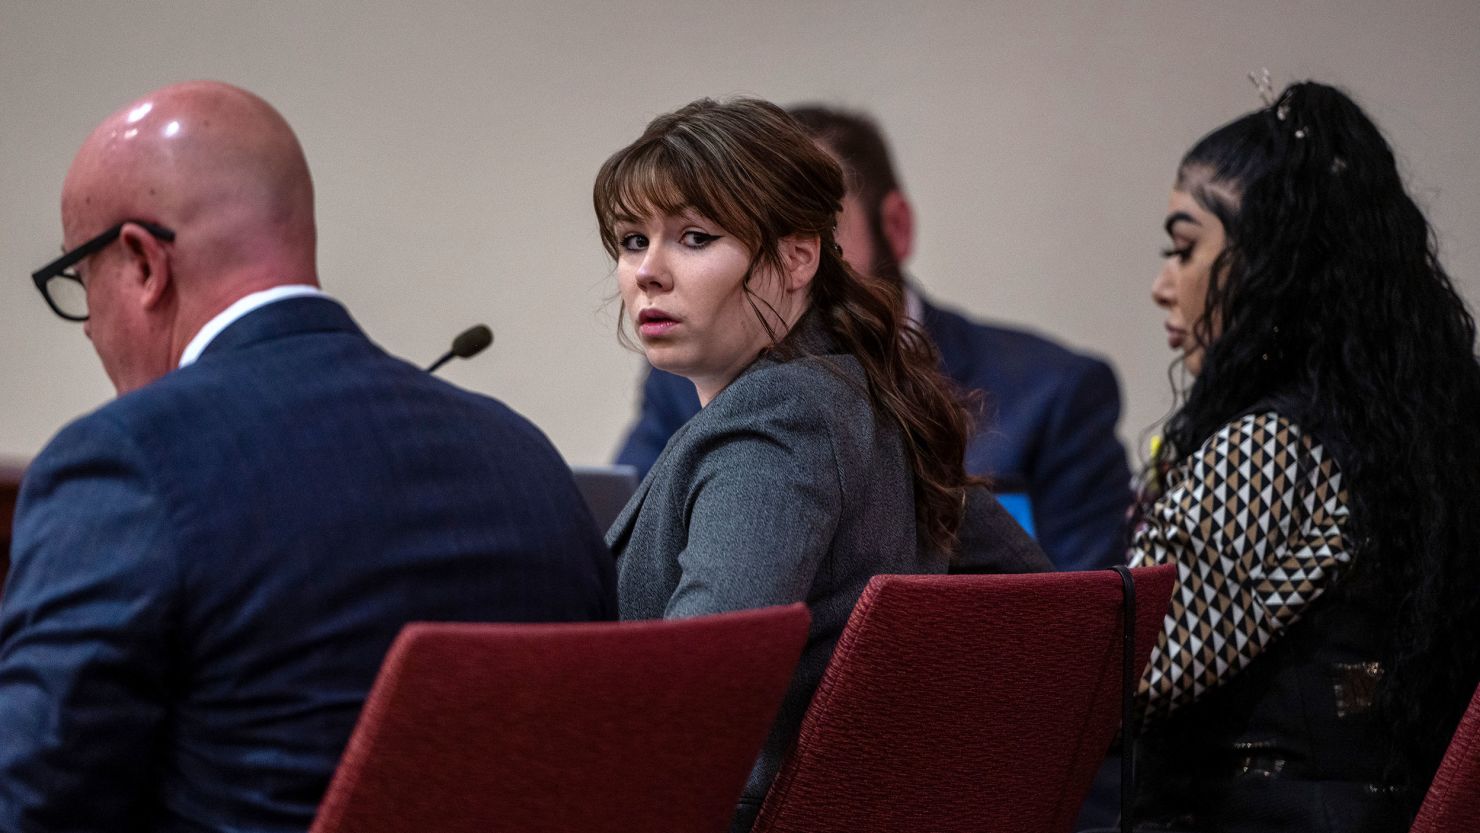 Hannah Gutierrez Reed has pleaded not guilty to involuntary manslaughter and tampering with evidence in the fatal shooting on the set of the film "Rust."